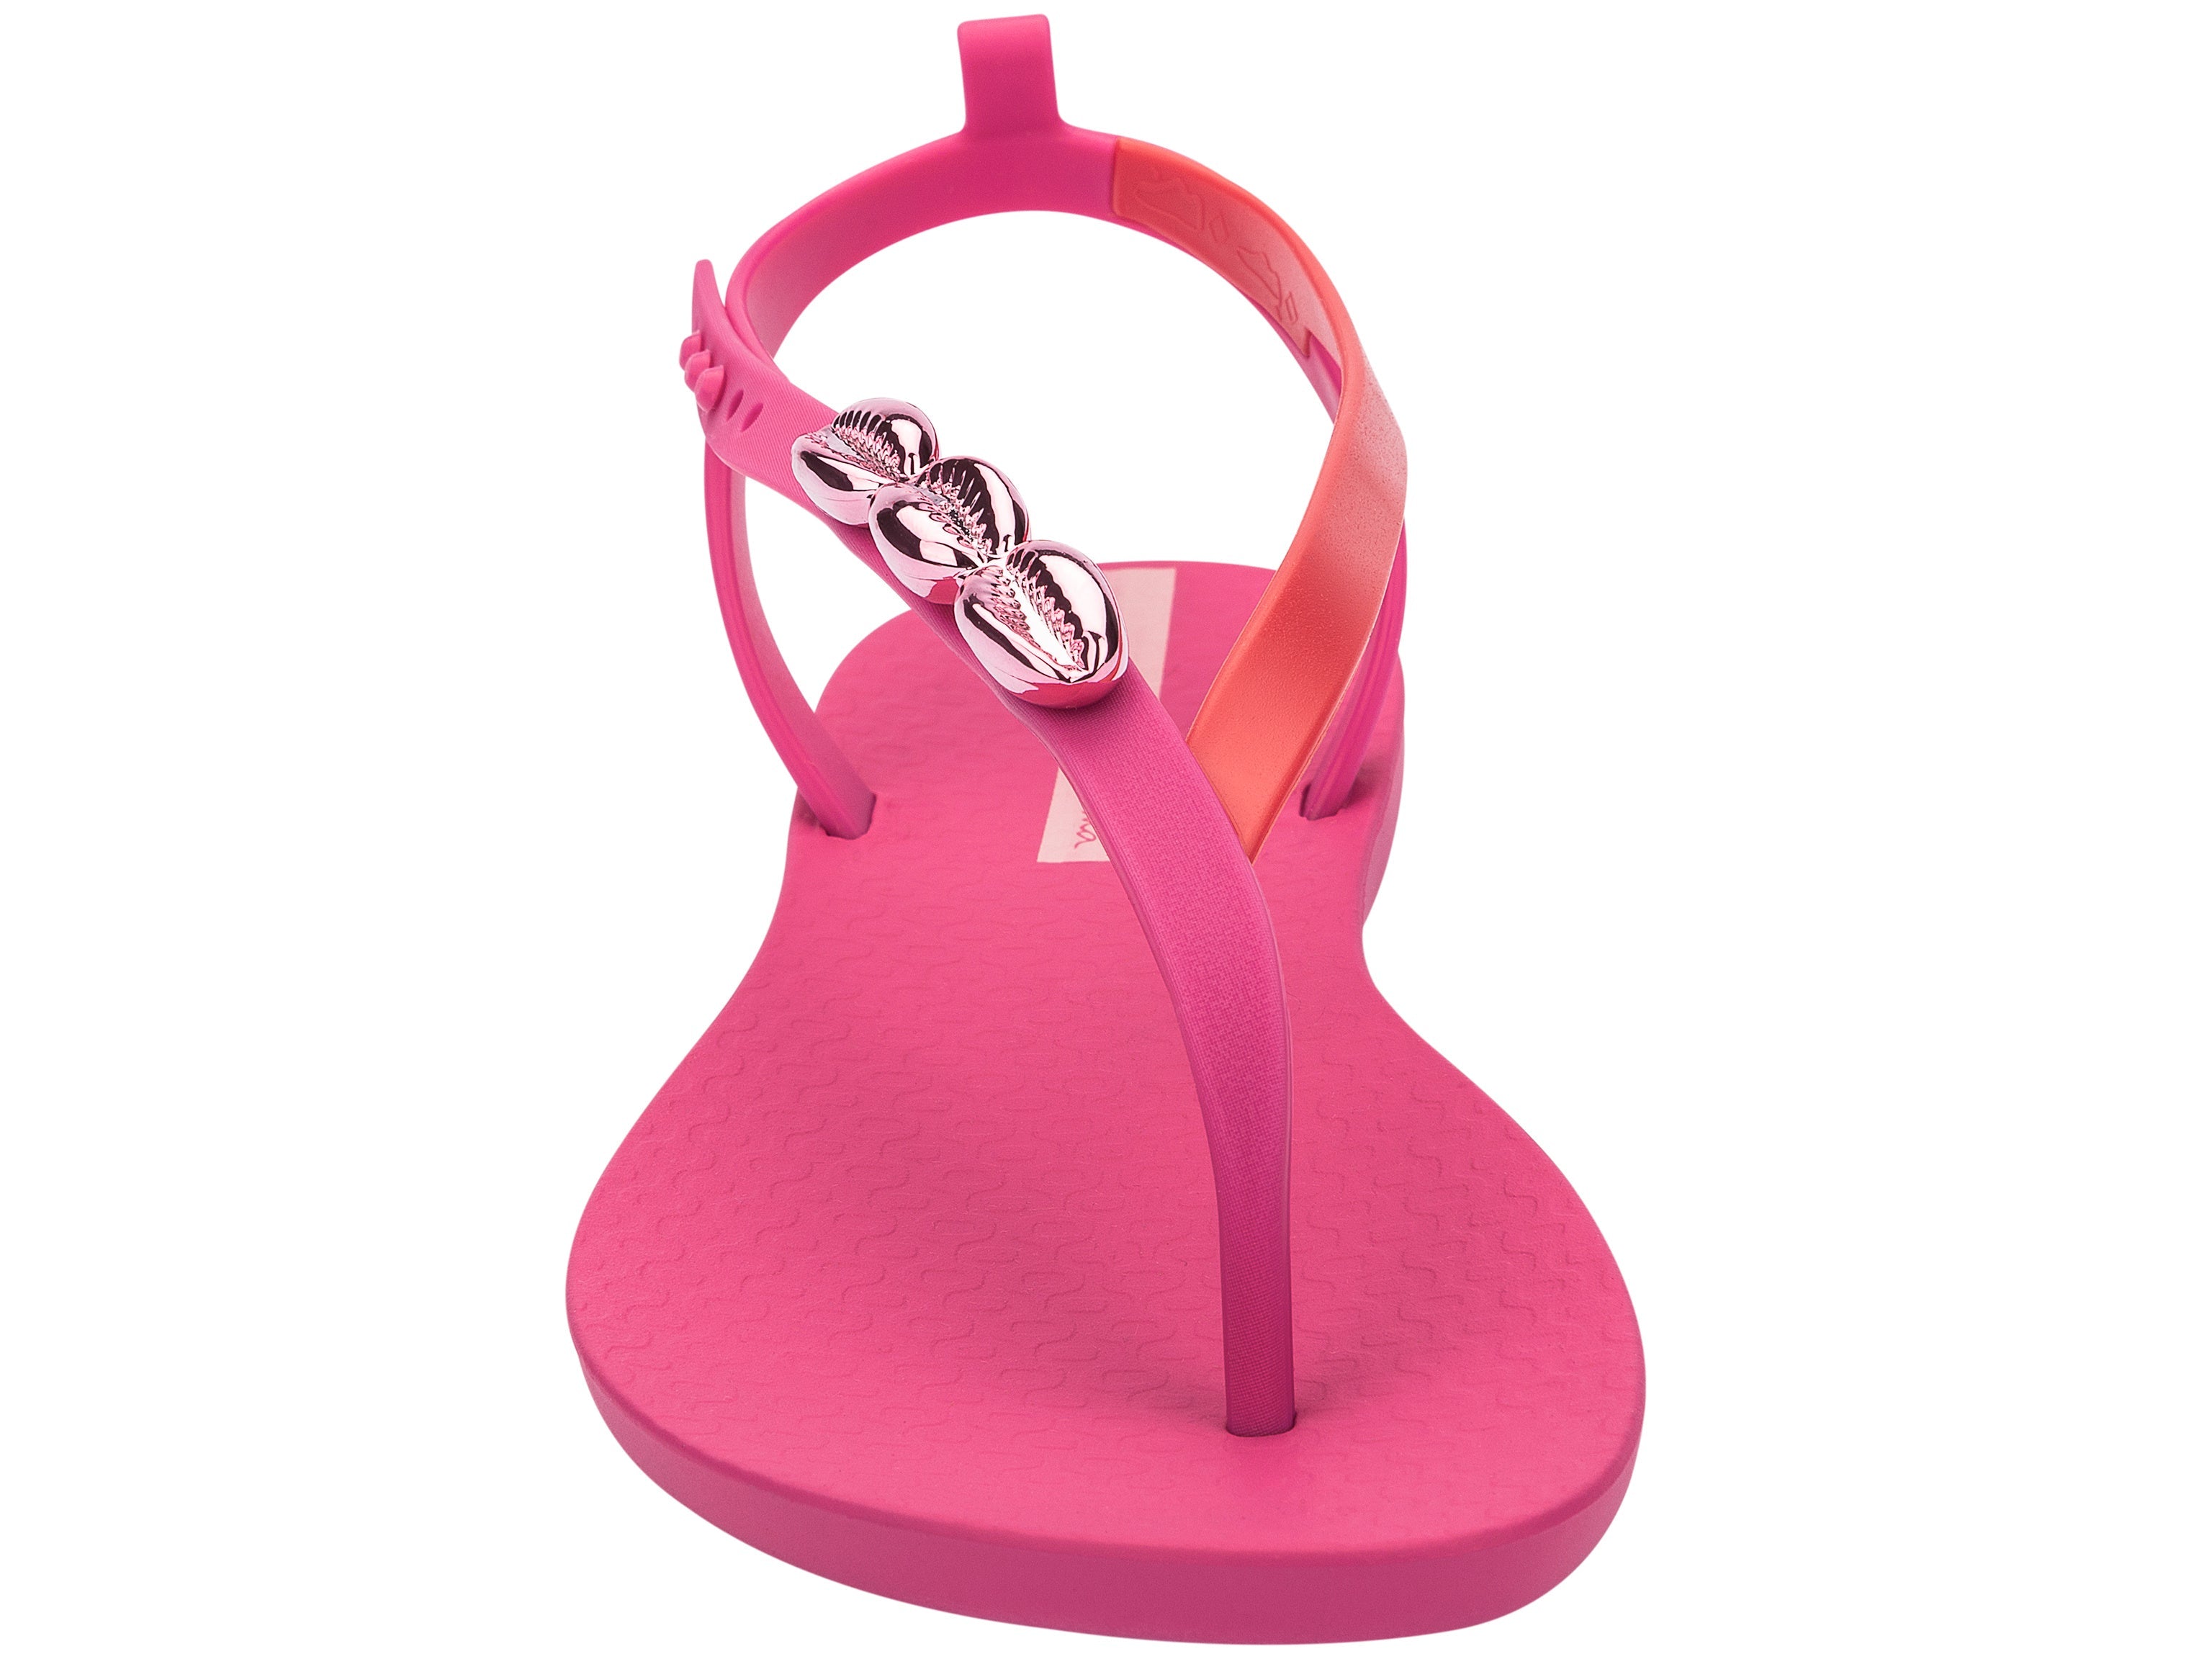 Front view of a pink Ipanema Salty women's sandal with 3 pink metallic shells on the strap.